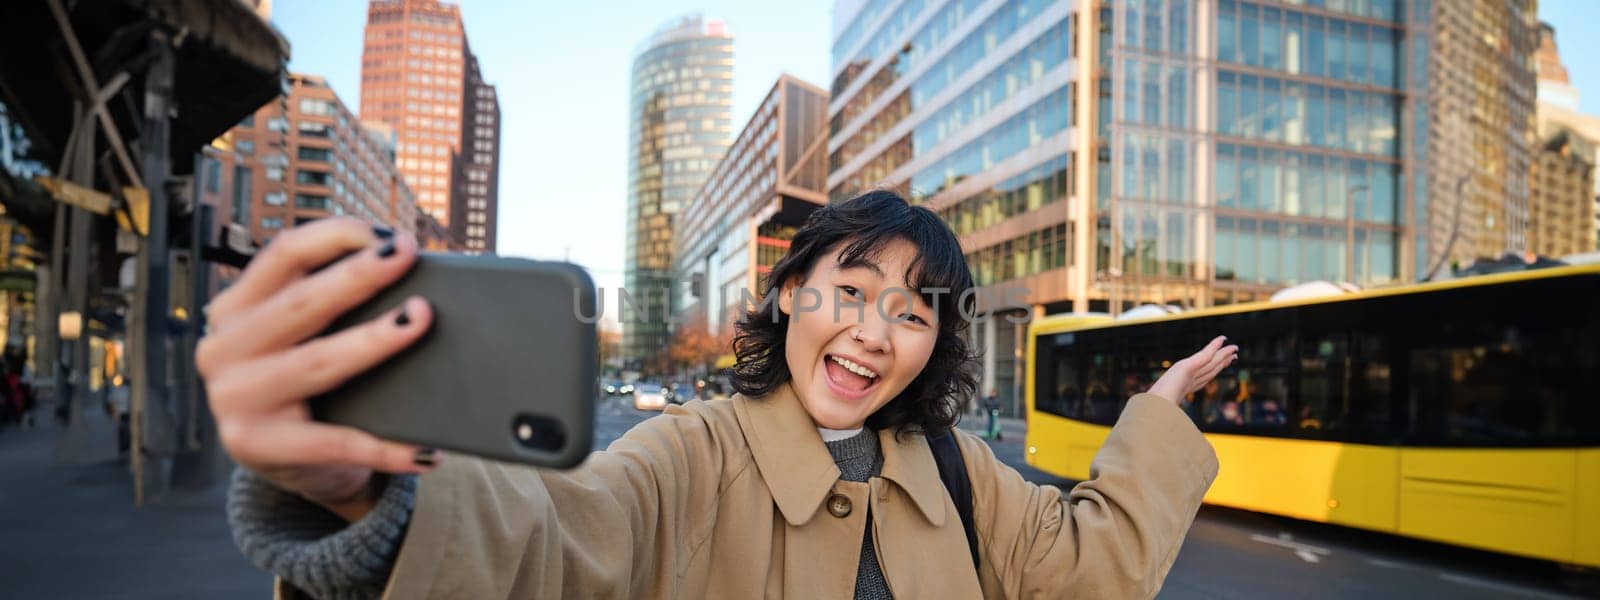 Upbeat asian girl takes selfie with smartphone in city centre, showing something behind her with smiling face. Tourist goes sightseeing by Benzoix